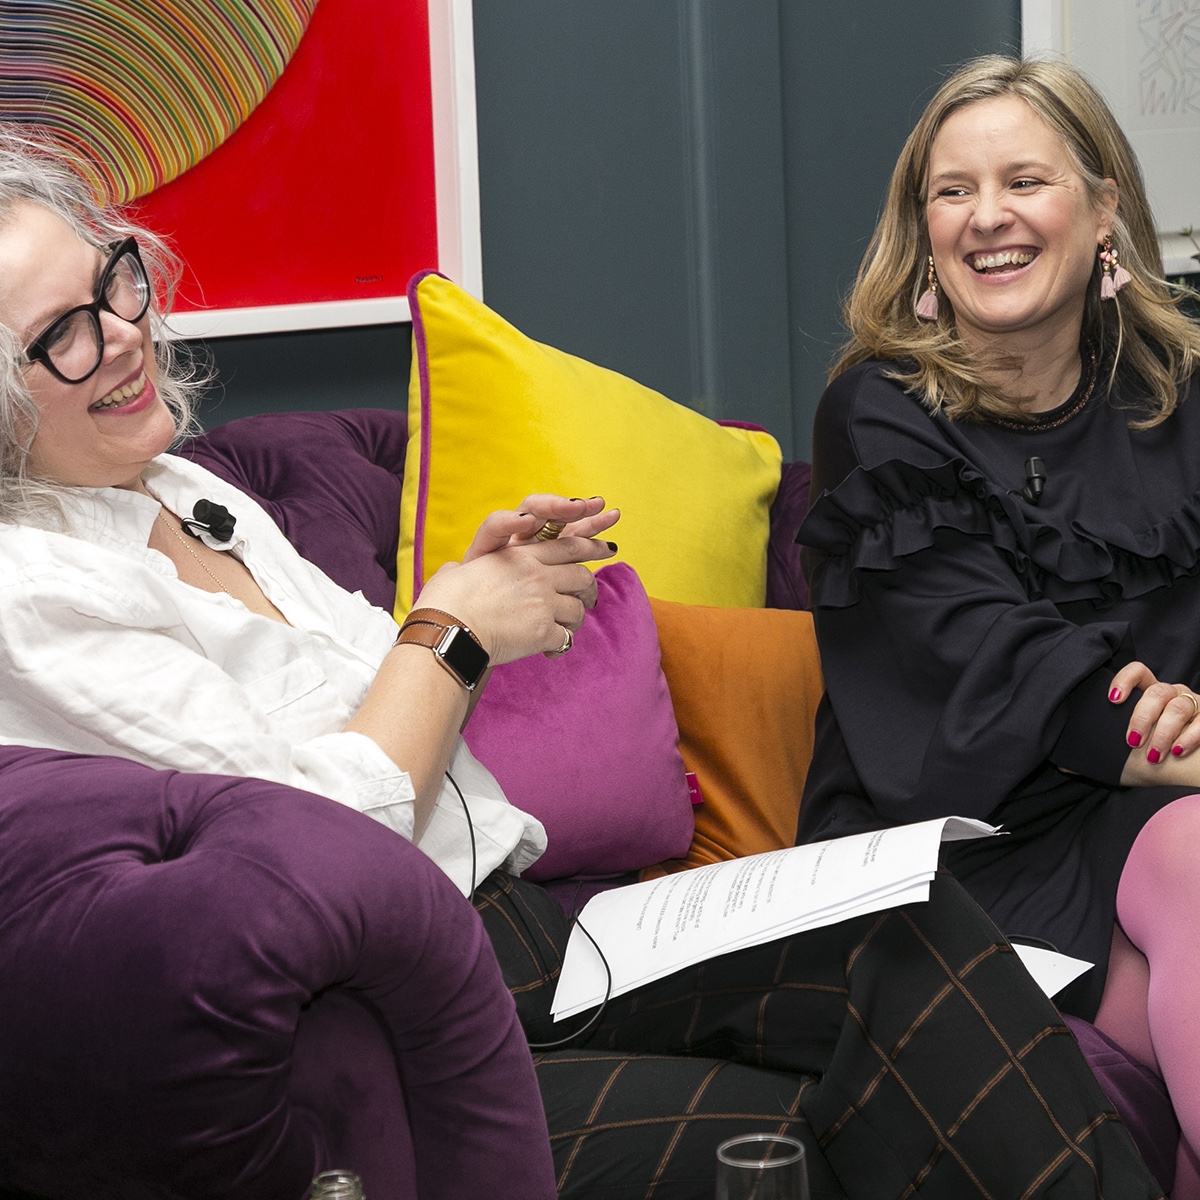 Sophie Robinson and Kate Watson-Smyth present their live Podcast The Great Indoors recorded at The Dean Hotel in Dublin. Discussing all things interiors and the favourite Design Crimes #sophierobinson #interiordesign #podcast #thegreatindoors